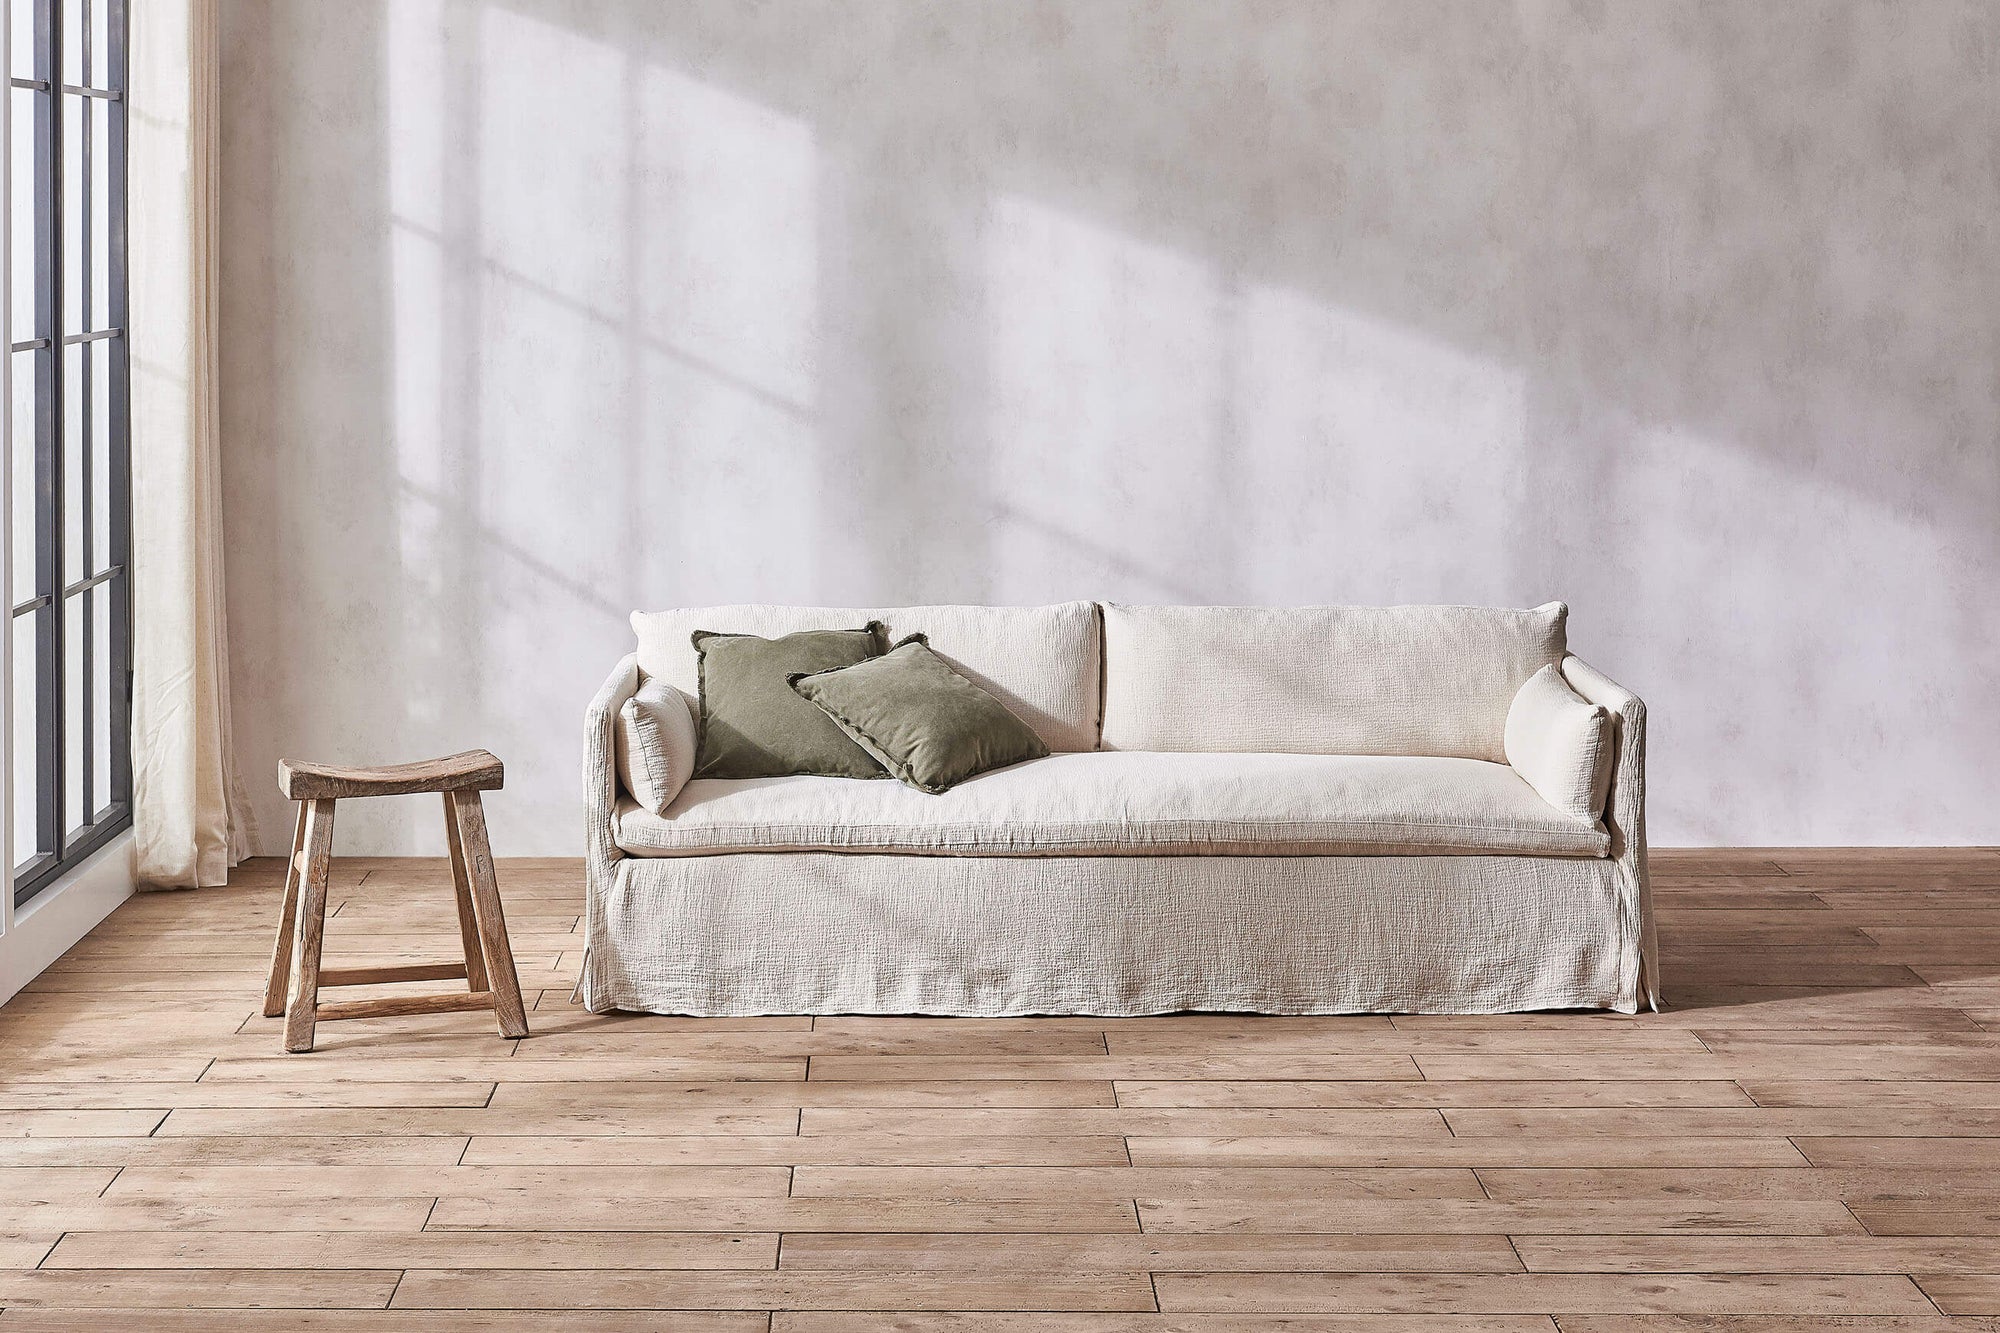 Gabriel 84" Sofa in Corn Silk, a light beige Washed Cotton Linen, with two sage throw pillows, next to a wooden stool